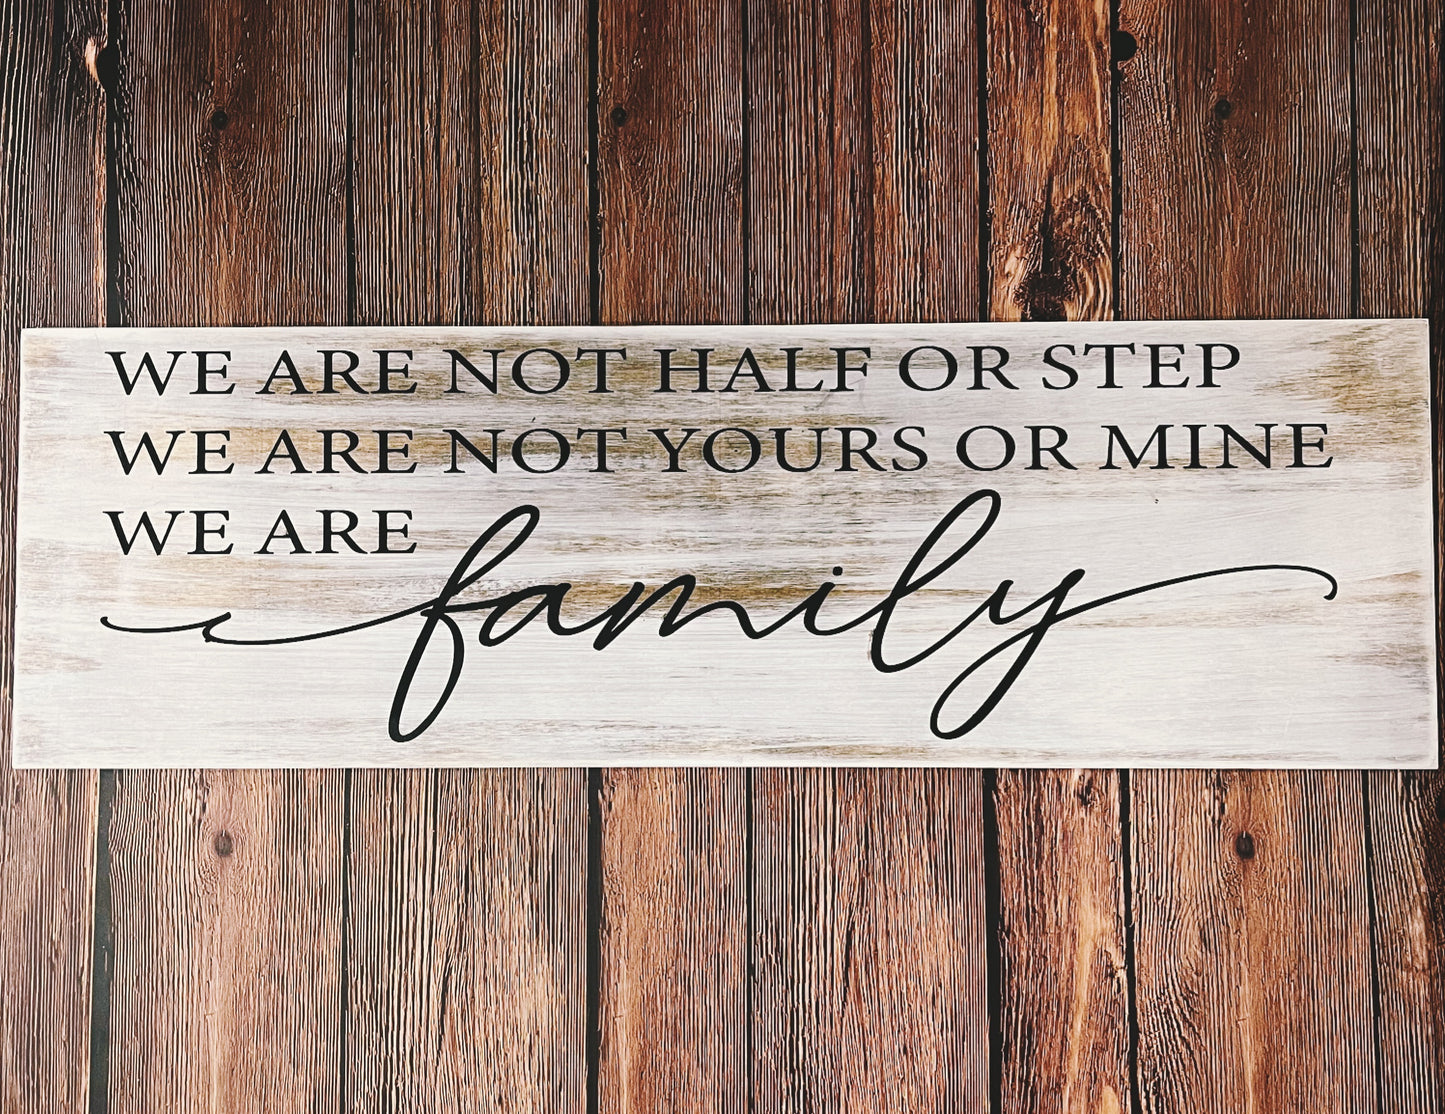 We Are Not Half or Step. We Are Not Yours or Mine. We are FAMILY: Plank Design